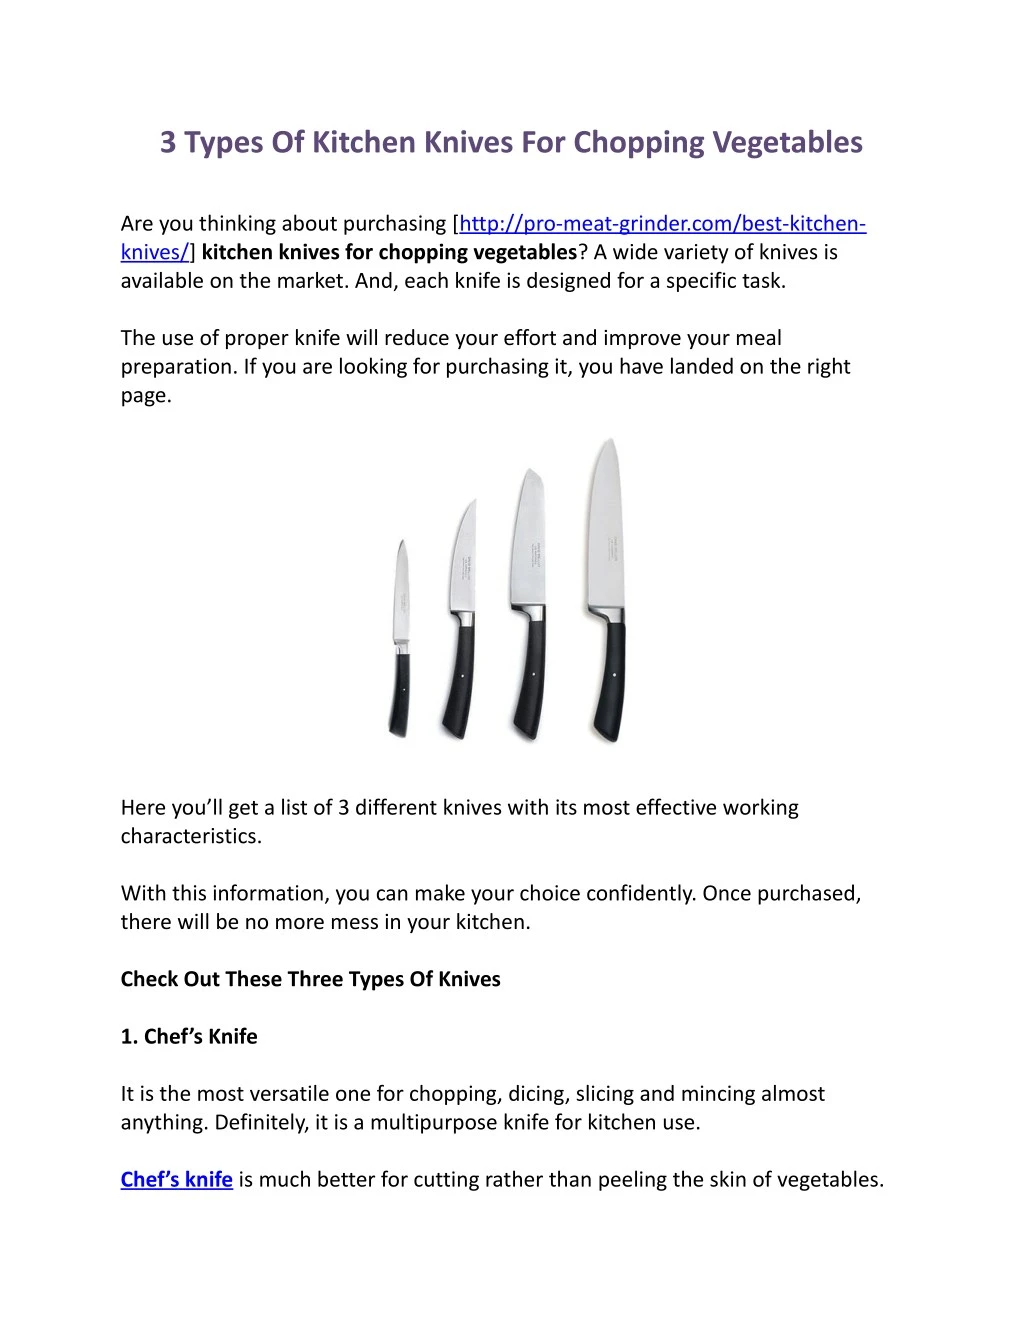 3 types of kitchen knives for chopping vegetables